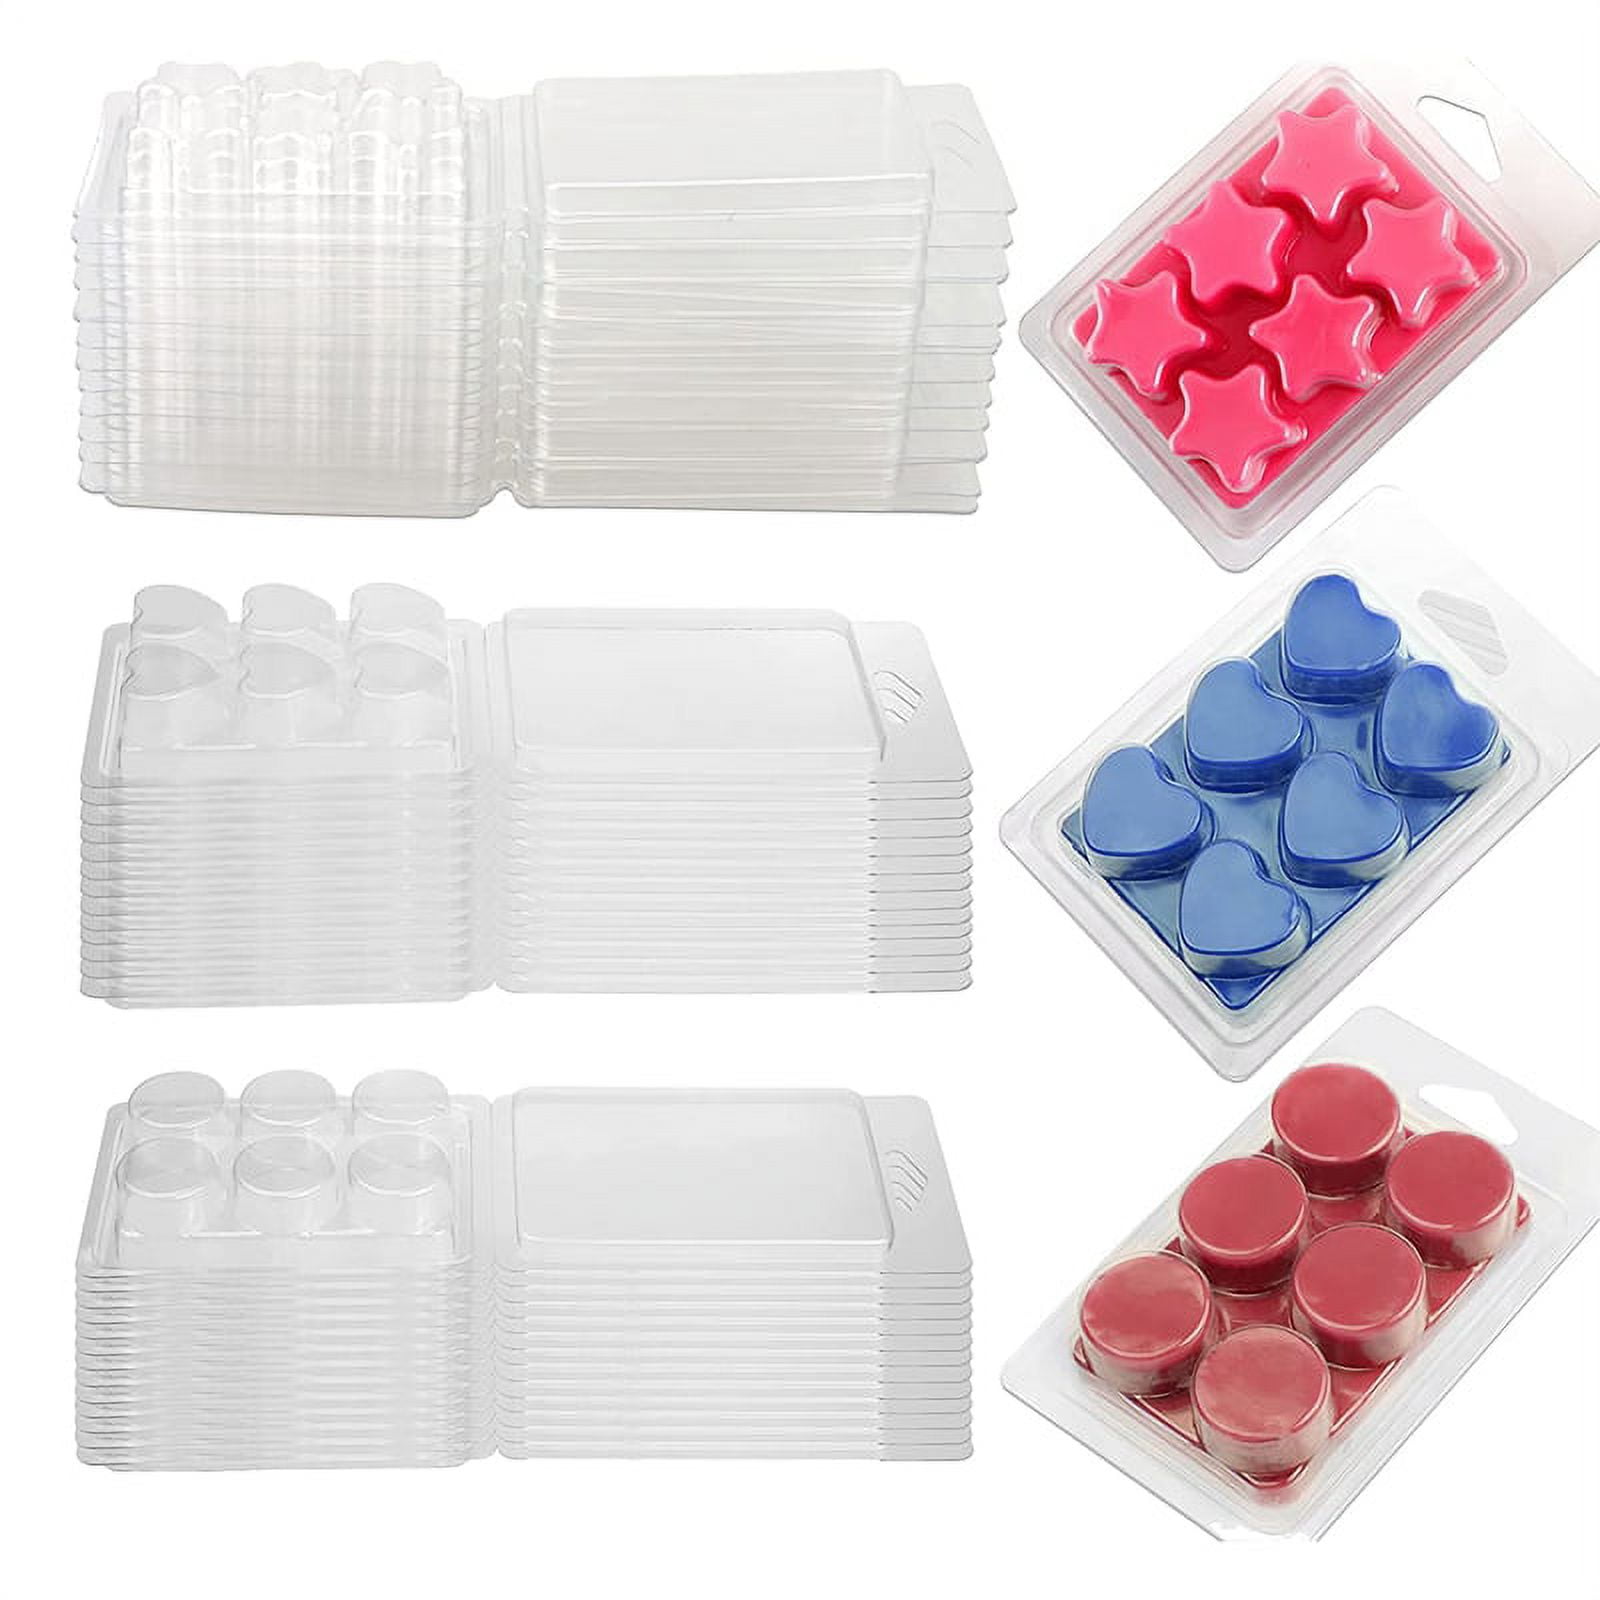 Purchase Wholesale wax melt molds silicone. Free Returns & Net 60